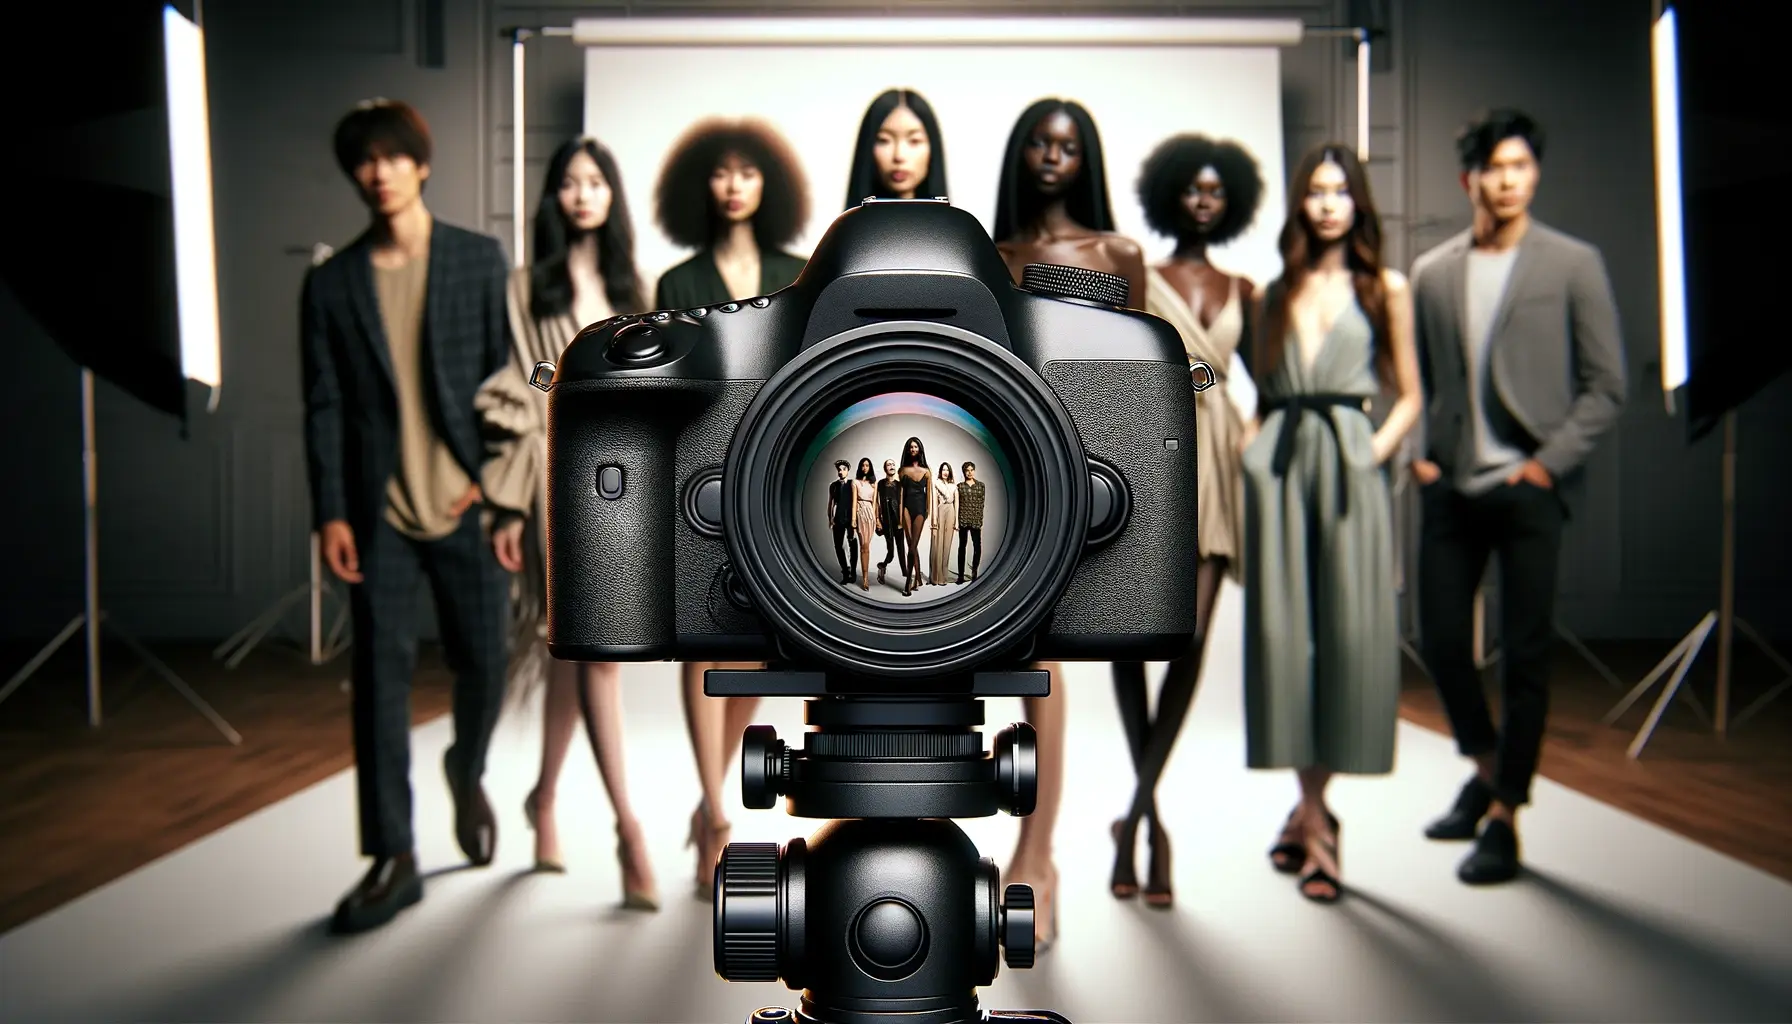 Professional DSLR camera focusing on a diverse group of models in a photo studio, with a creative reflection in the lens showcasing the subjects, indicative of high-quality photography services offered by Rent a PhotoBooth for fashion shoots and events.